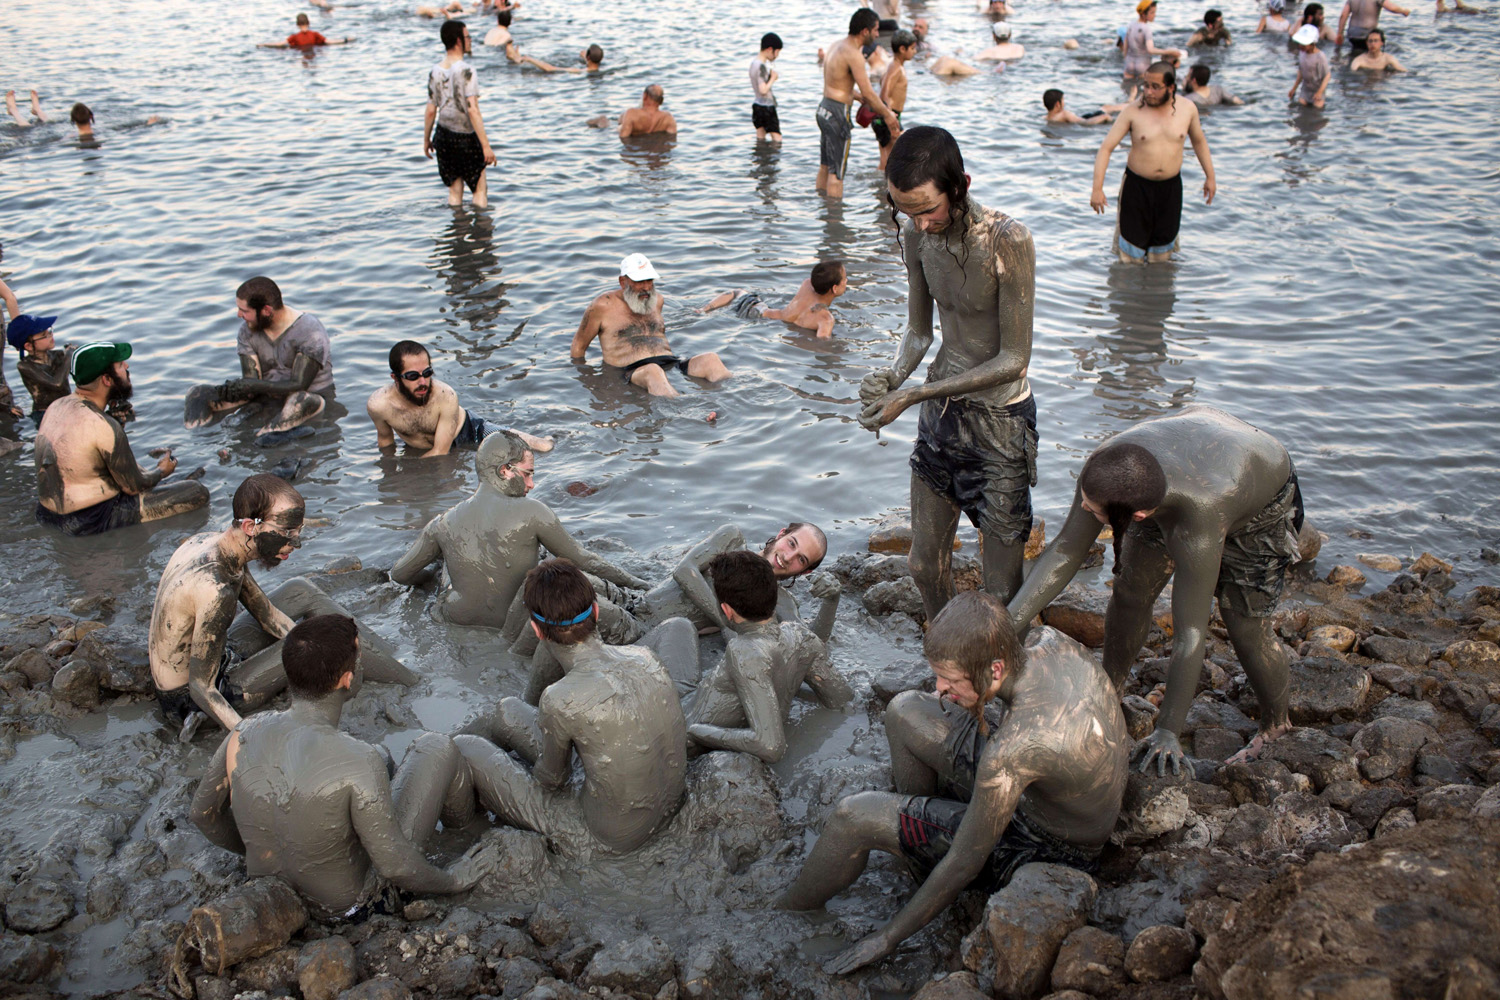 Aug. 17, 2014. Ultra-Orthodox Jewish men and boys cover their bodies with mineral-rich mud, during their vacation, at a Men's only beach on the shores of the northern part of the Dead Sea in the Israeli-occupied West Bank.